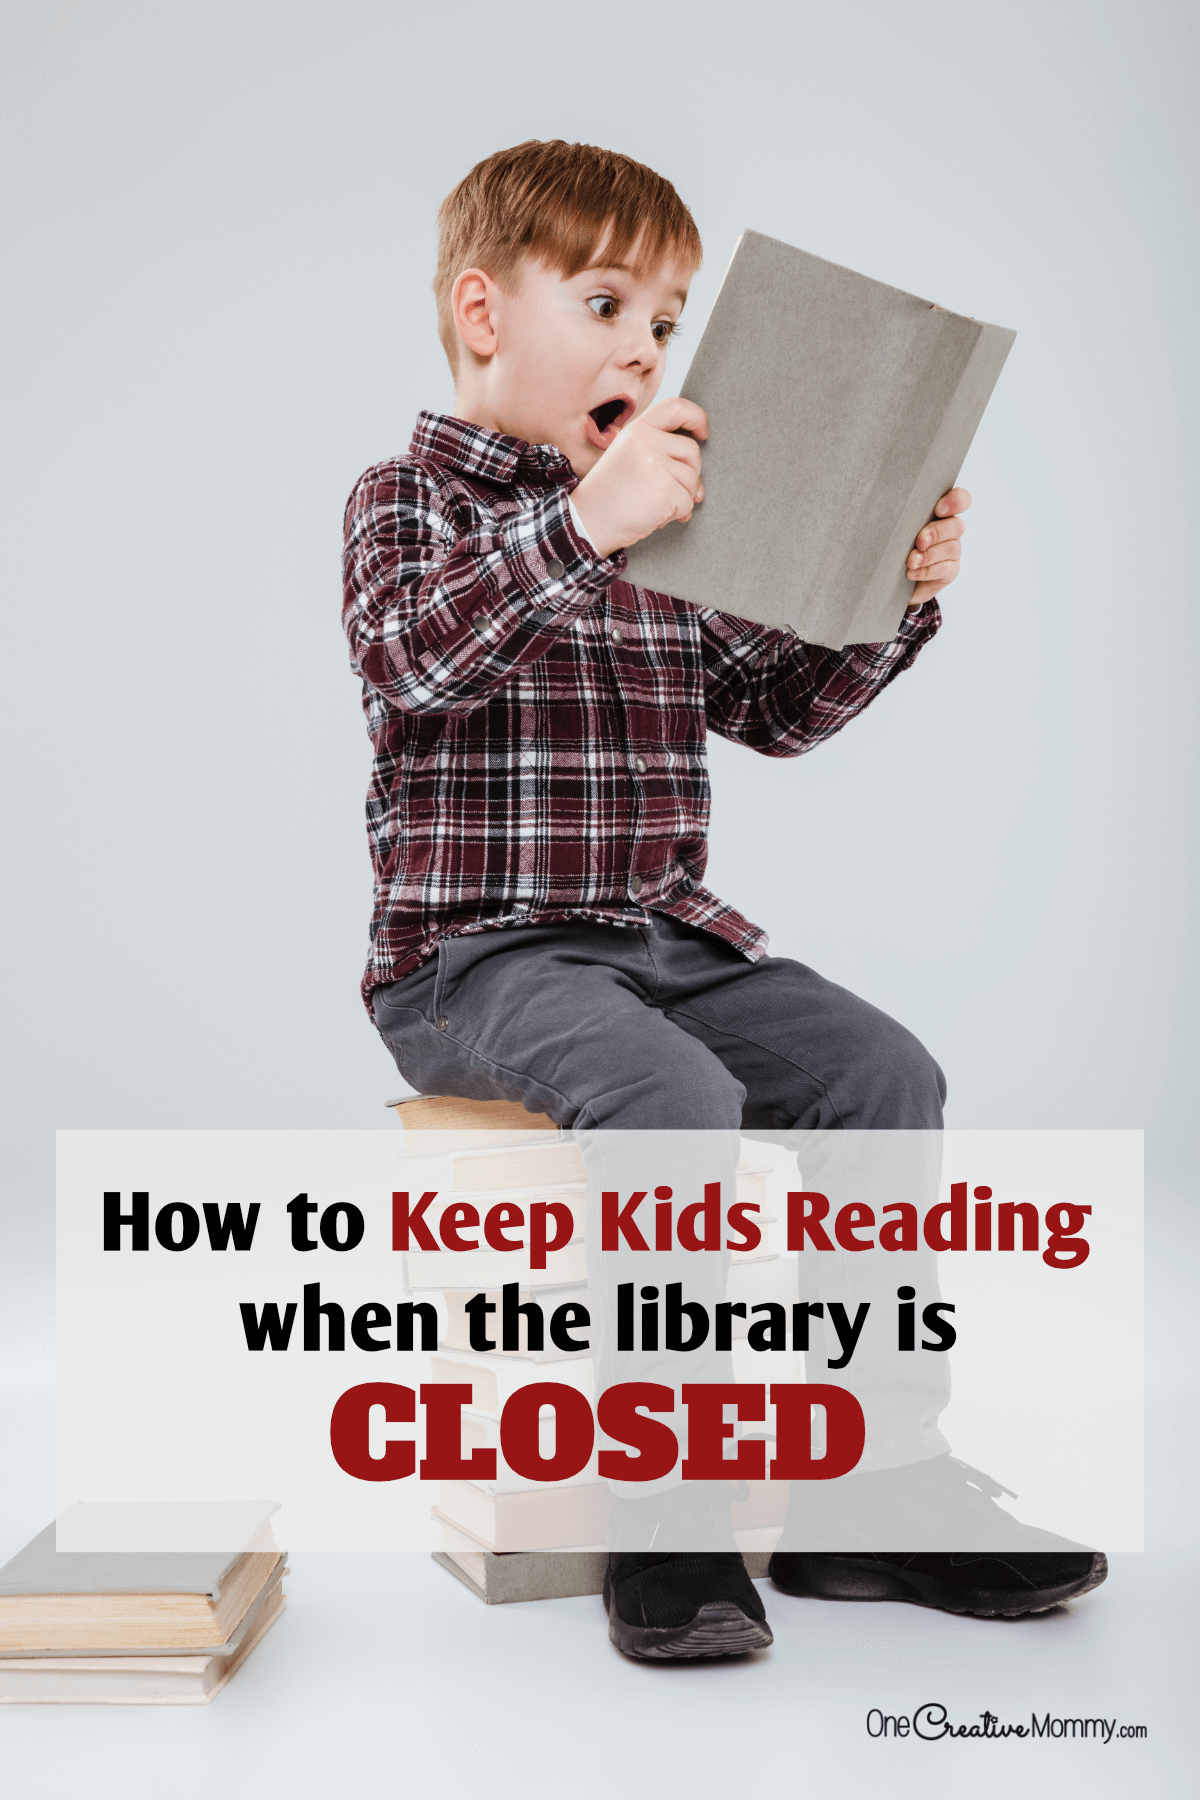 Keep kids reading even when the library is closed